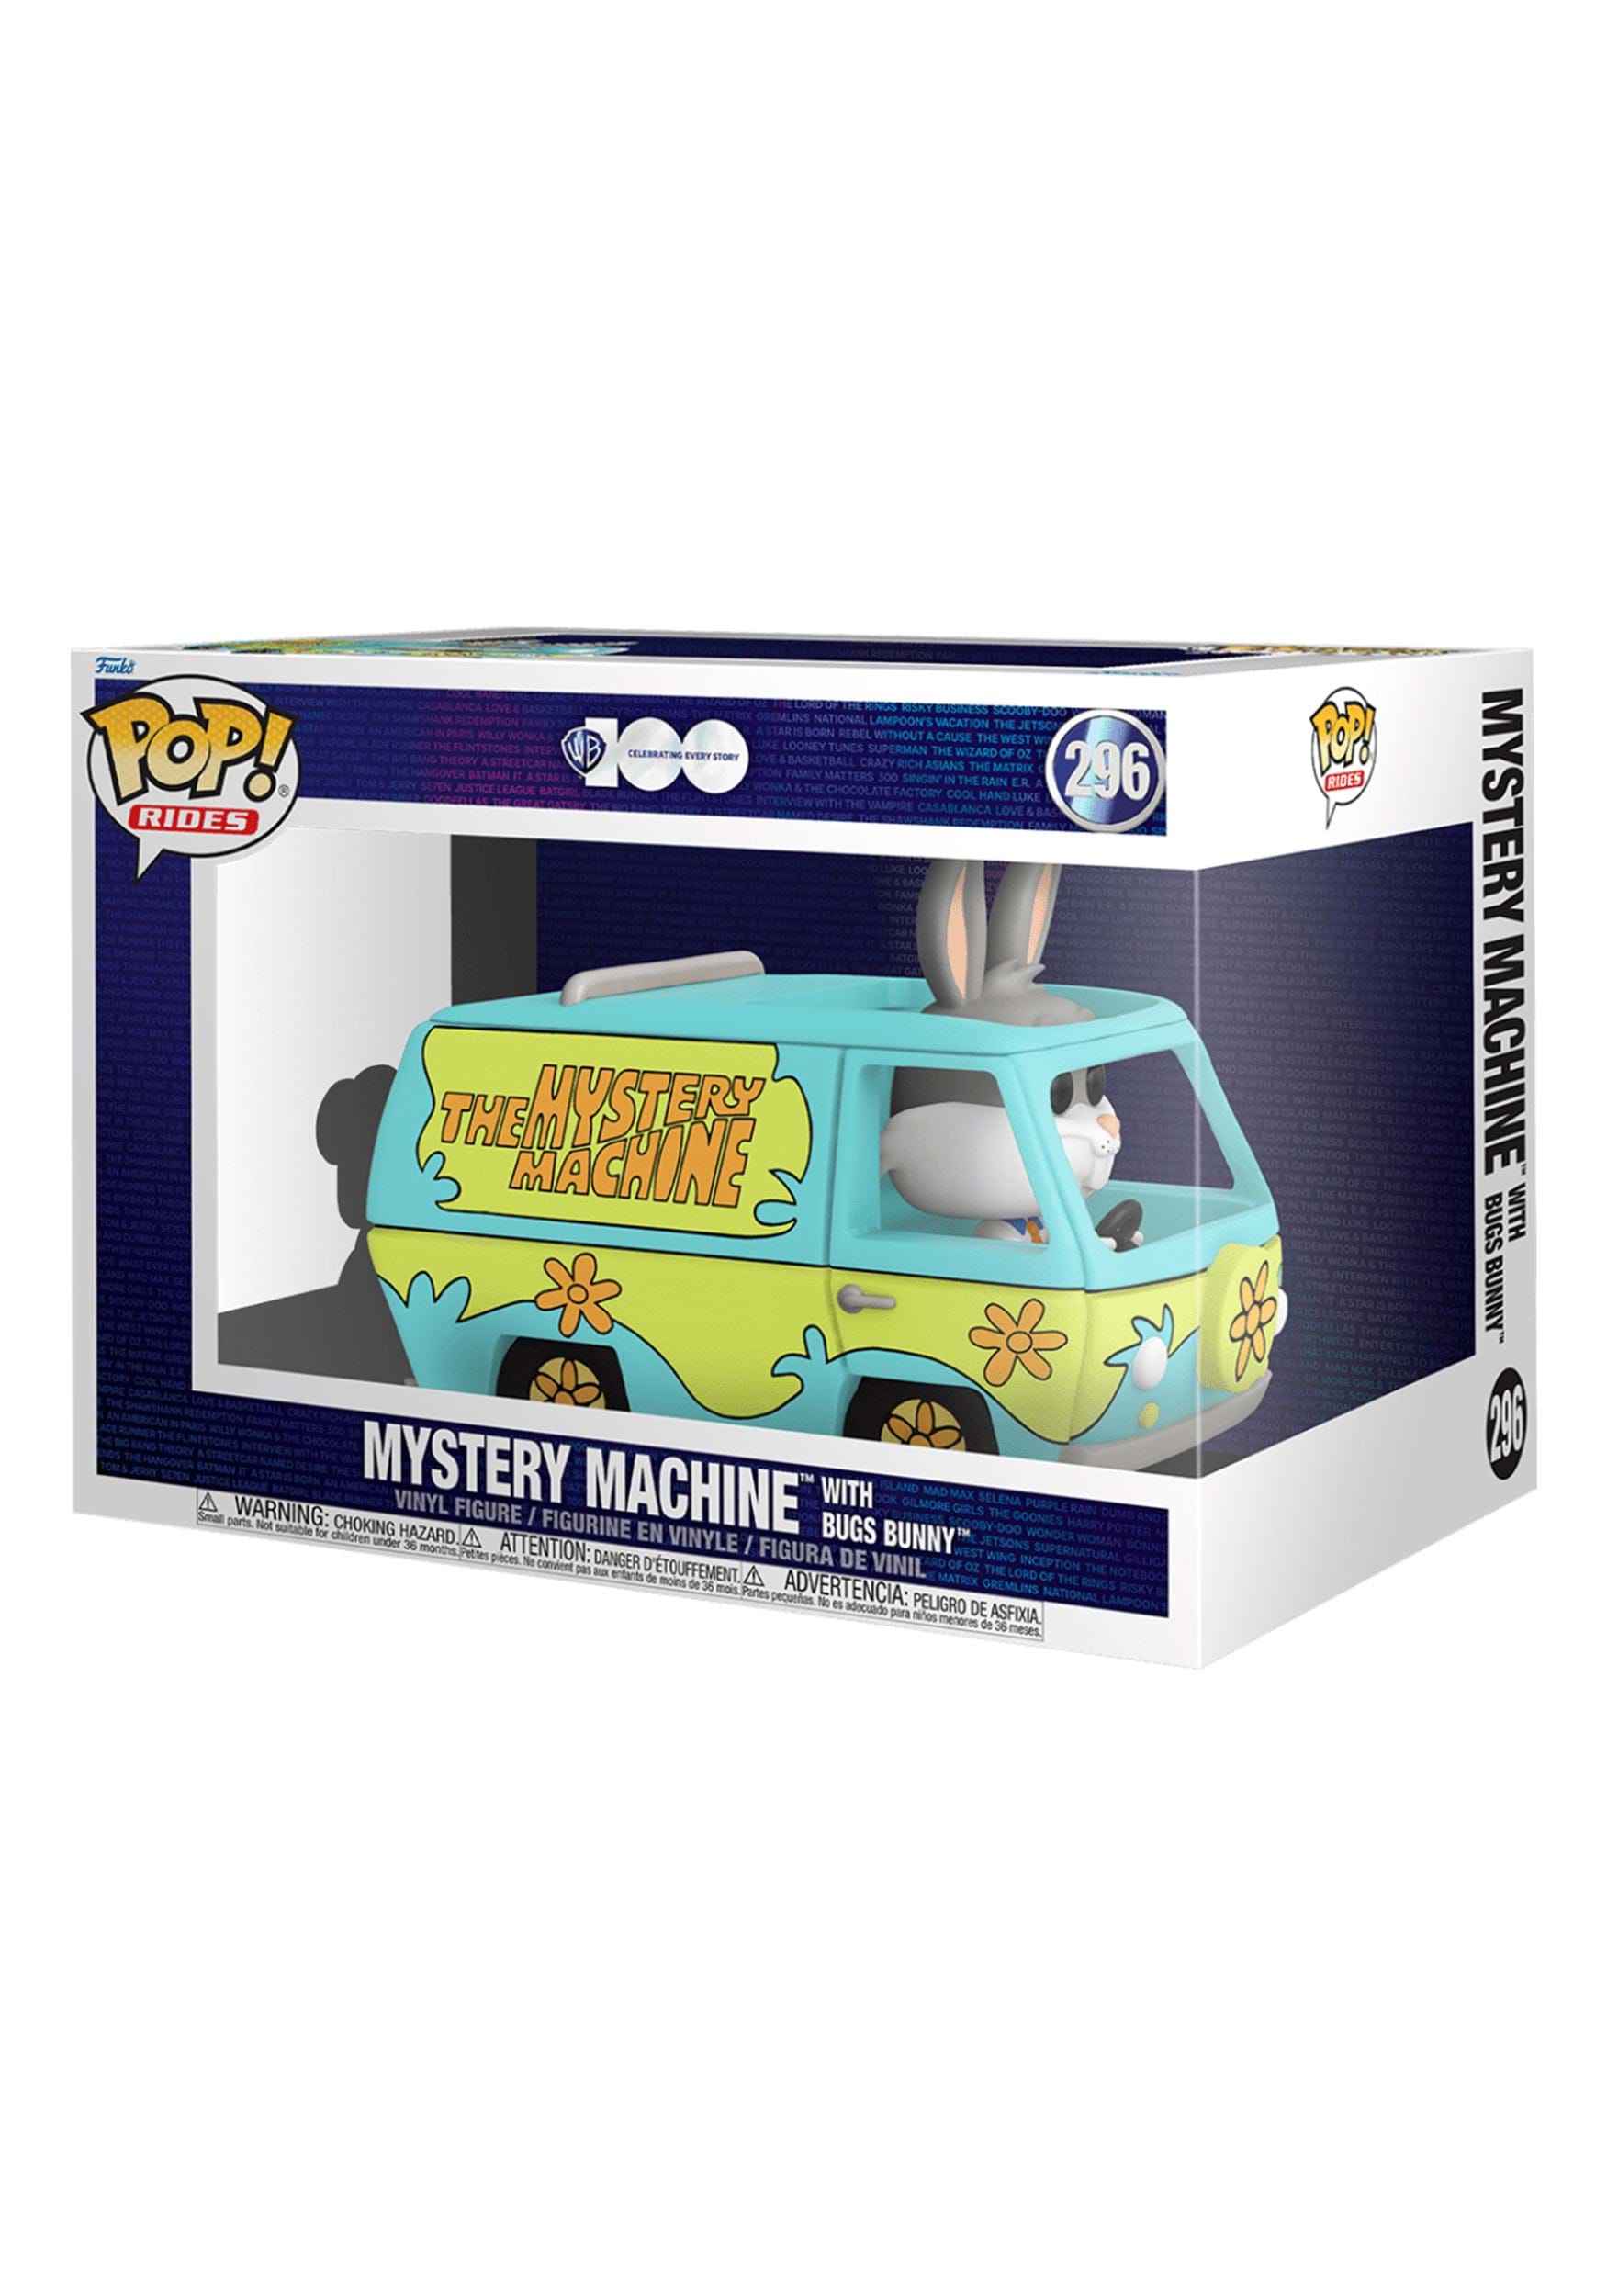 https://images.fun.com/products/90728/2-1-262735/pop-ride-supdlx-mystery-machine-with-bugs-alt-1.jpg